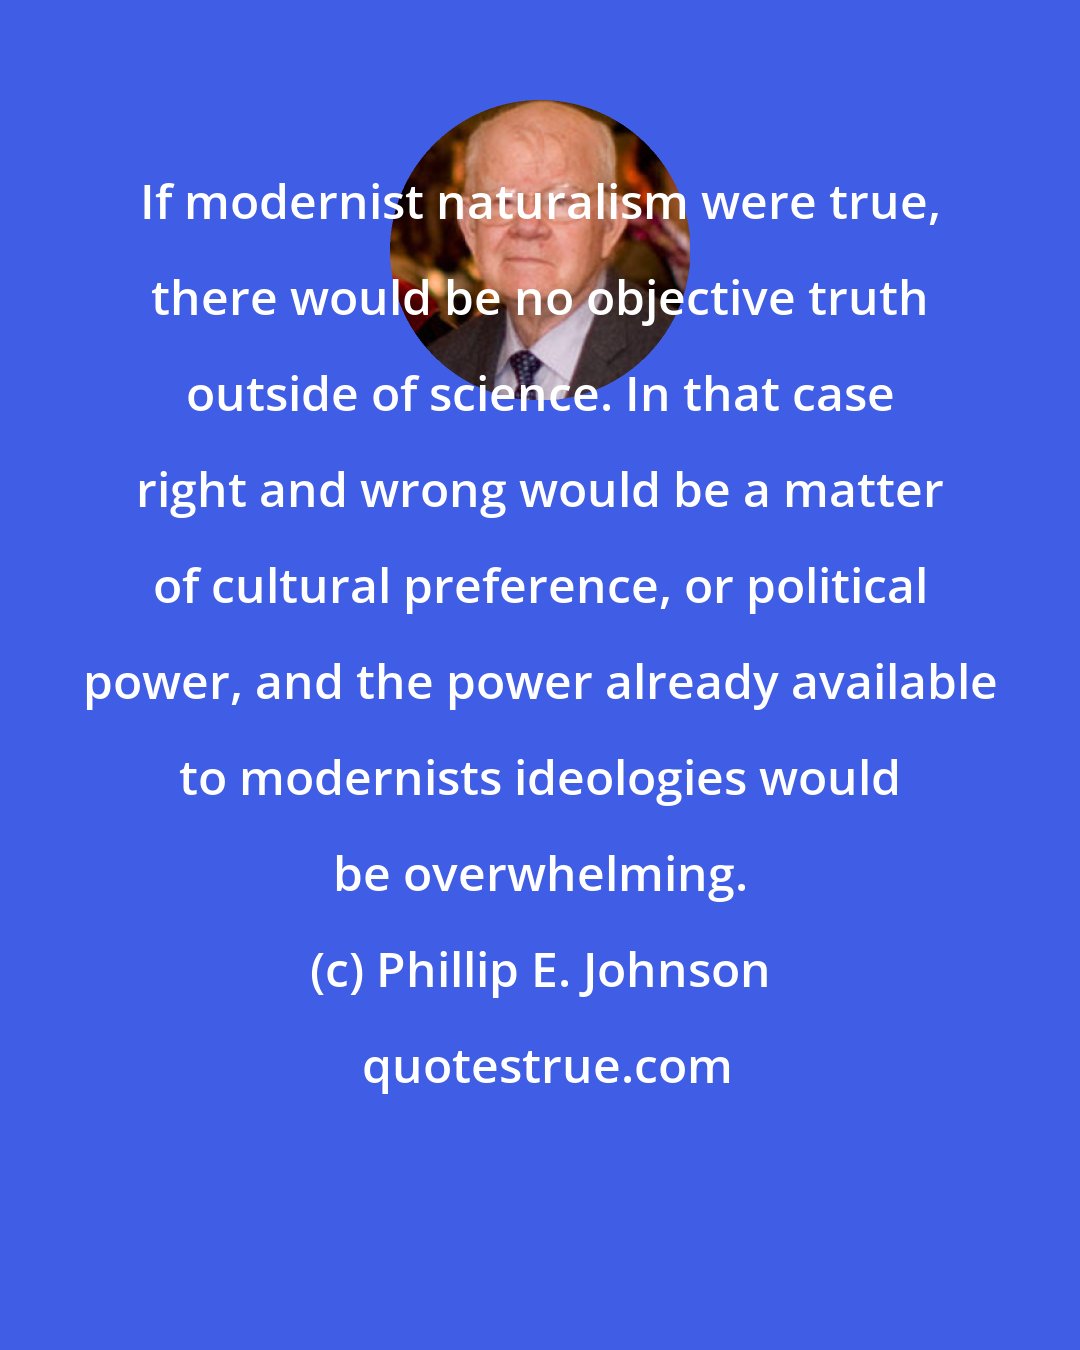 Phillip E. Johnson: If modernist naturalism were true, there would be no objective truth outside of science. In that case right and wrong would be a matter of cultural preference, or political power, and the power already available to modernists ideologies would be overwhelming.